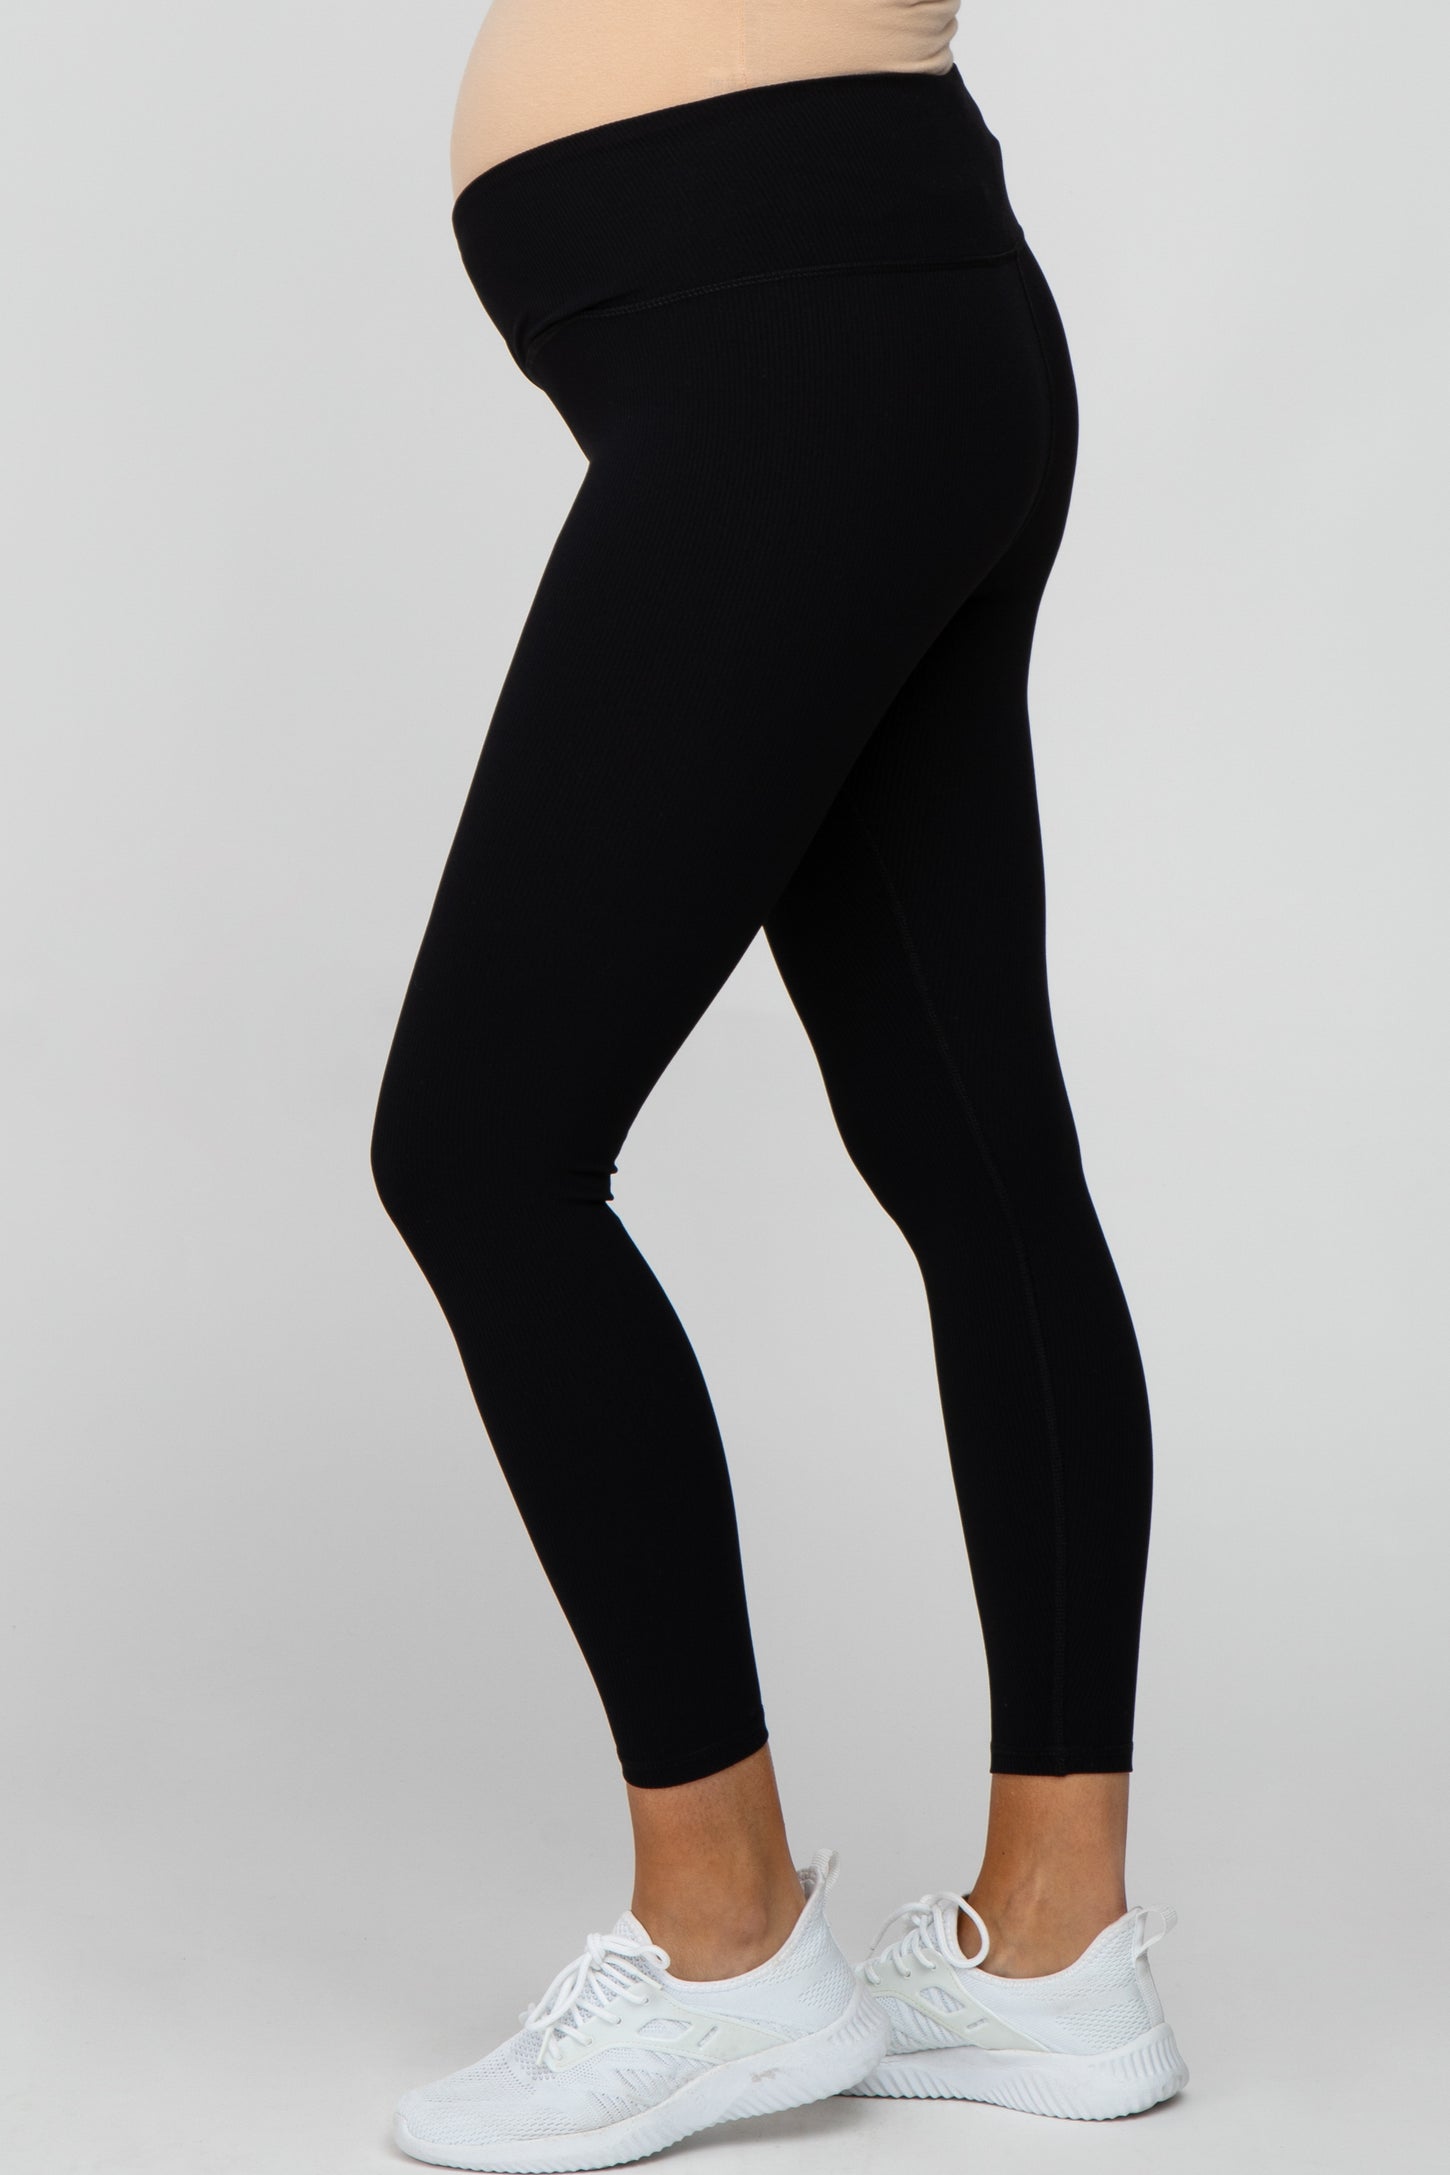 PureLuxe High-Waisted Maternity Legging Fabletics, 59% OFF